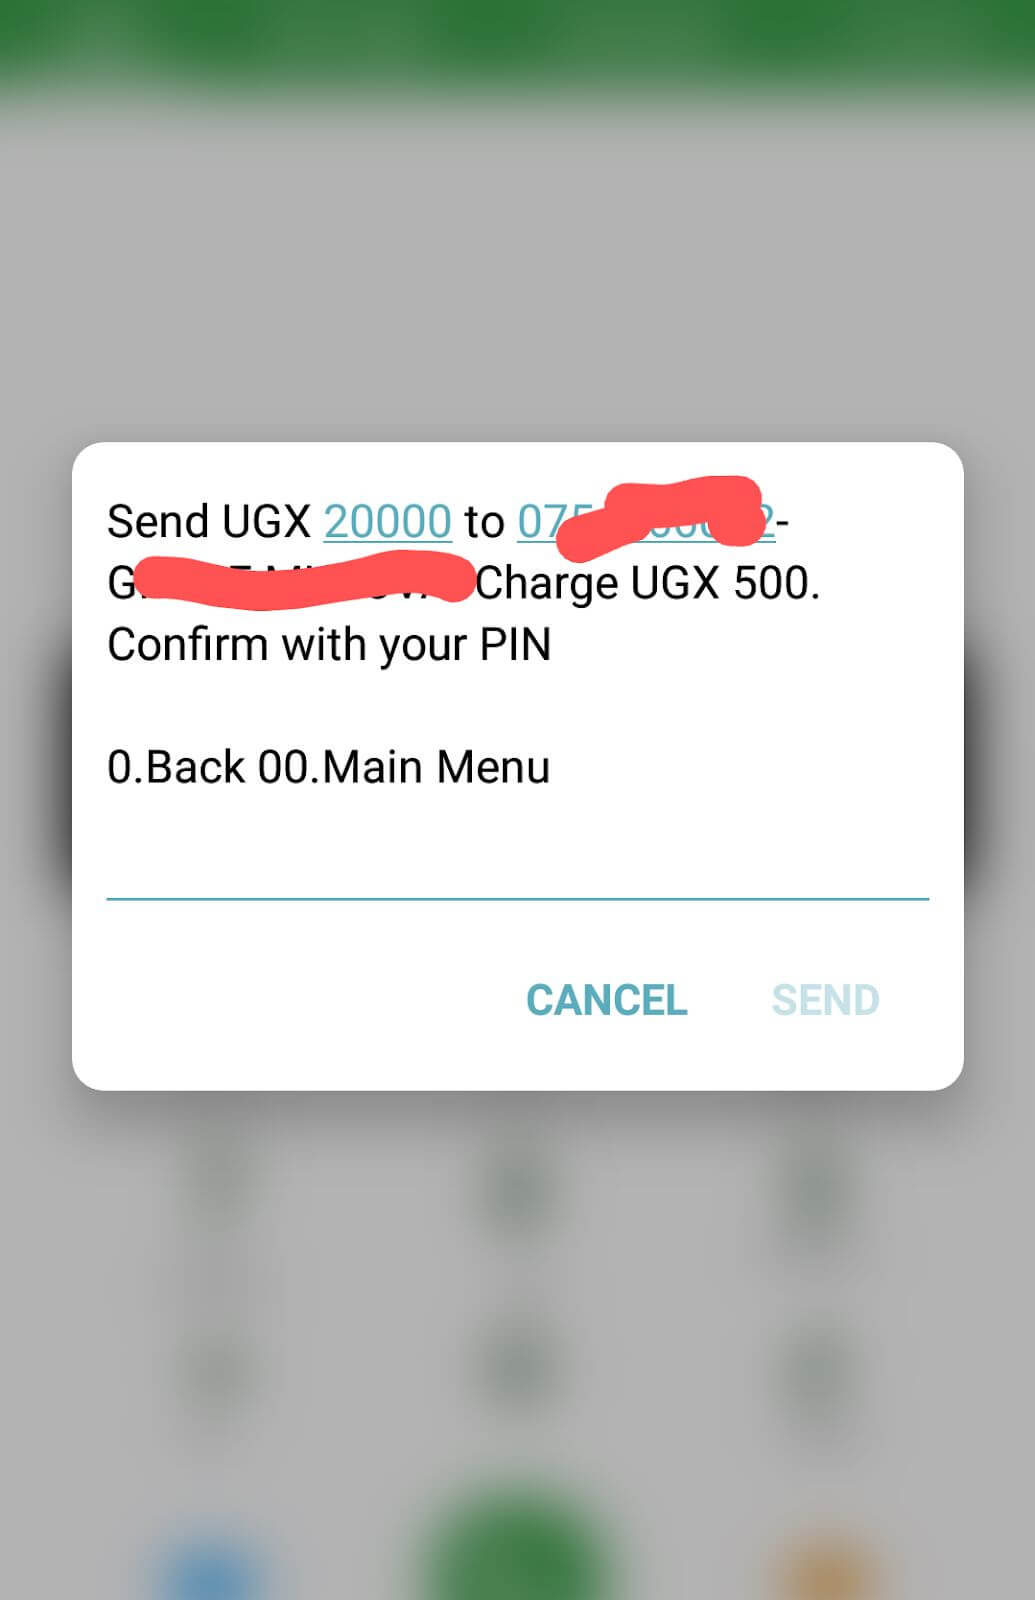 the amount of money to send, the number and name are displayed 